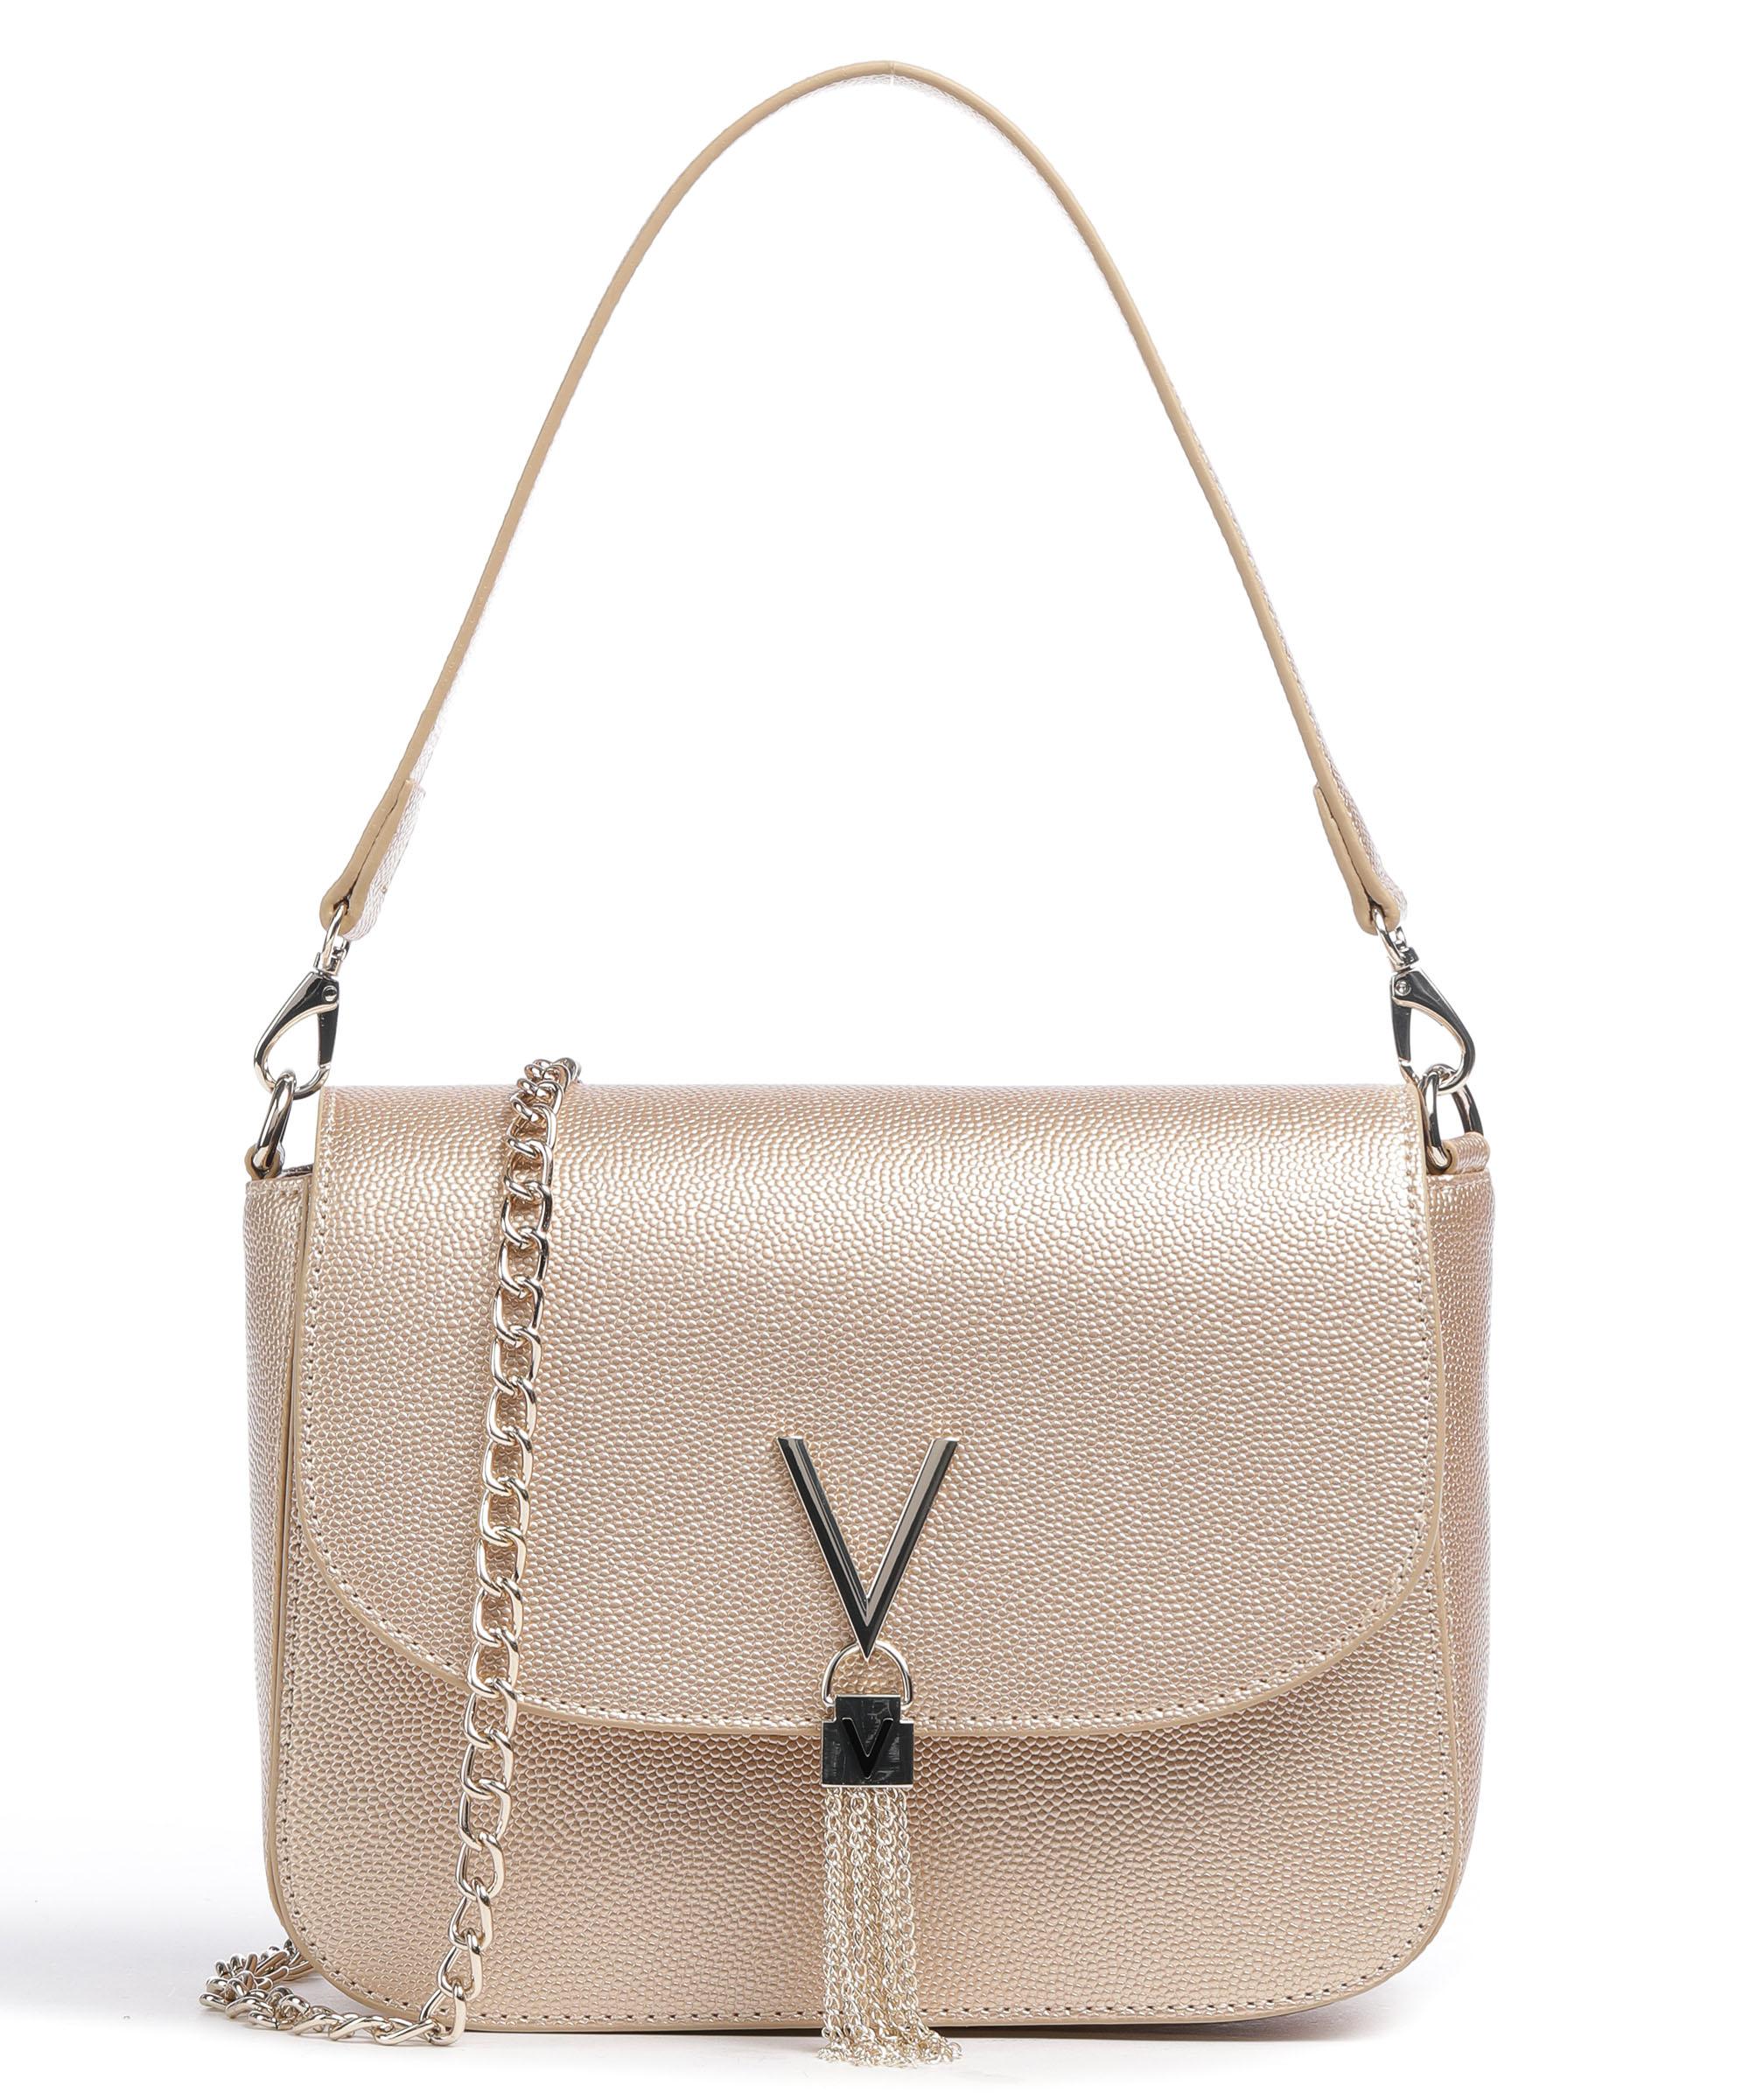 Valentino Bags Poplar Tote | Oxygen Clothing